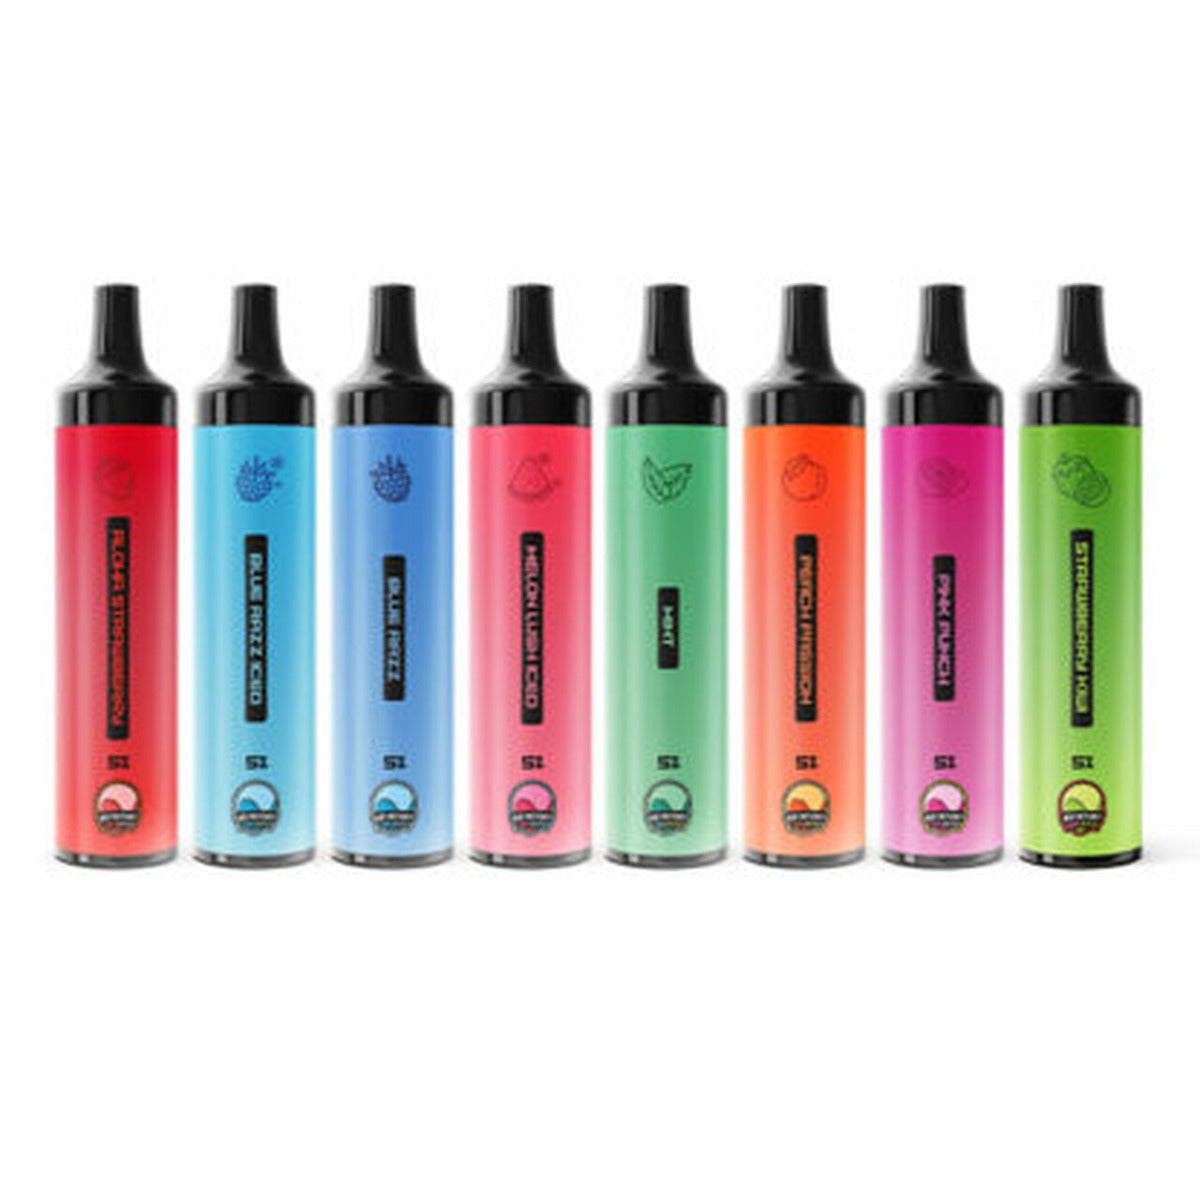 Air Factory Air Stix Rechargeable Disposable Vape 10-Pack Best Flavors Aloha Strawberry Blue Razz Iced Blue Razz Melon Lush Iced Mint Peach Passion Pink Punch Strawberry Kiwi